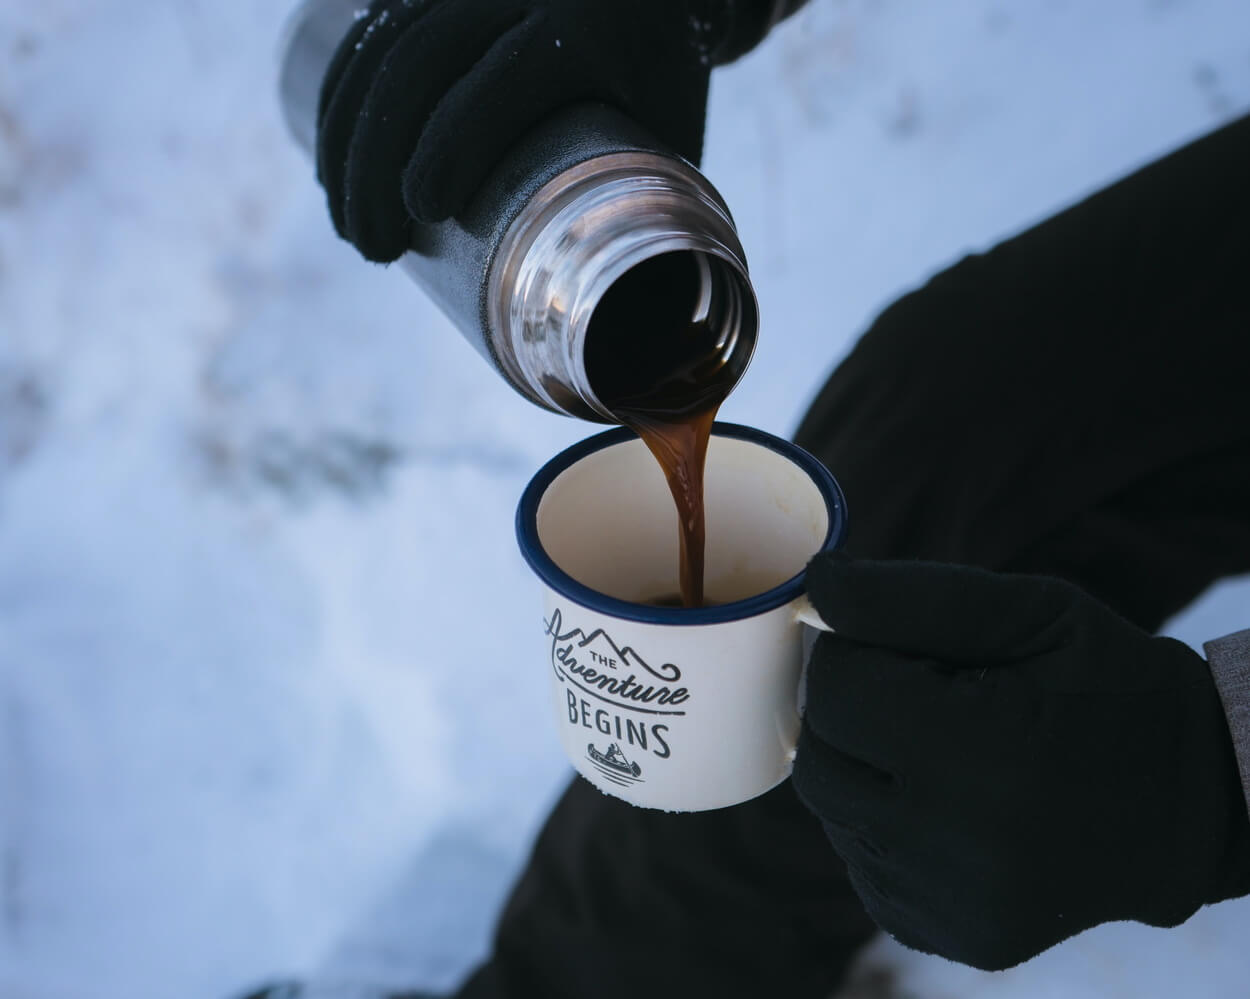 https://coffeelevels.com/wp-content/uploads/2021/11/coffee-in-a-hydro-flask.jpg